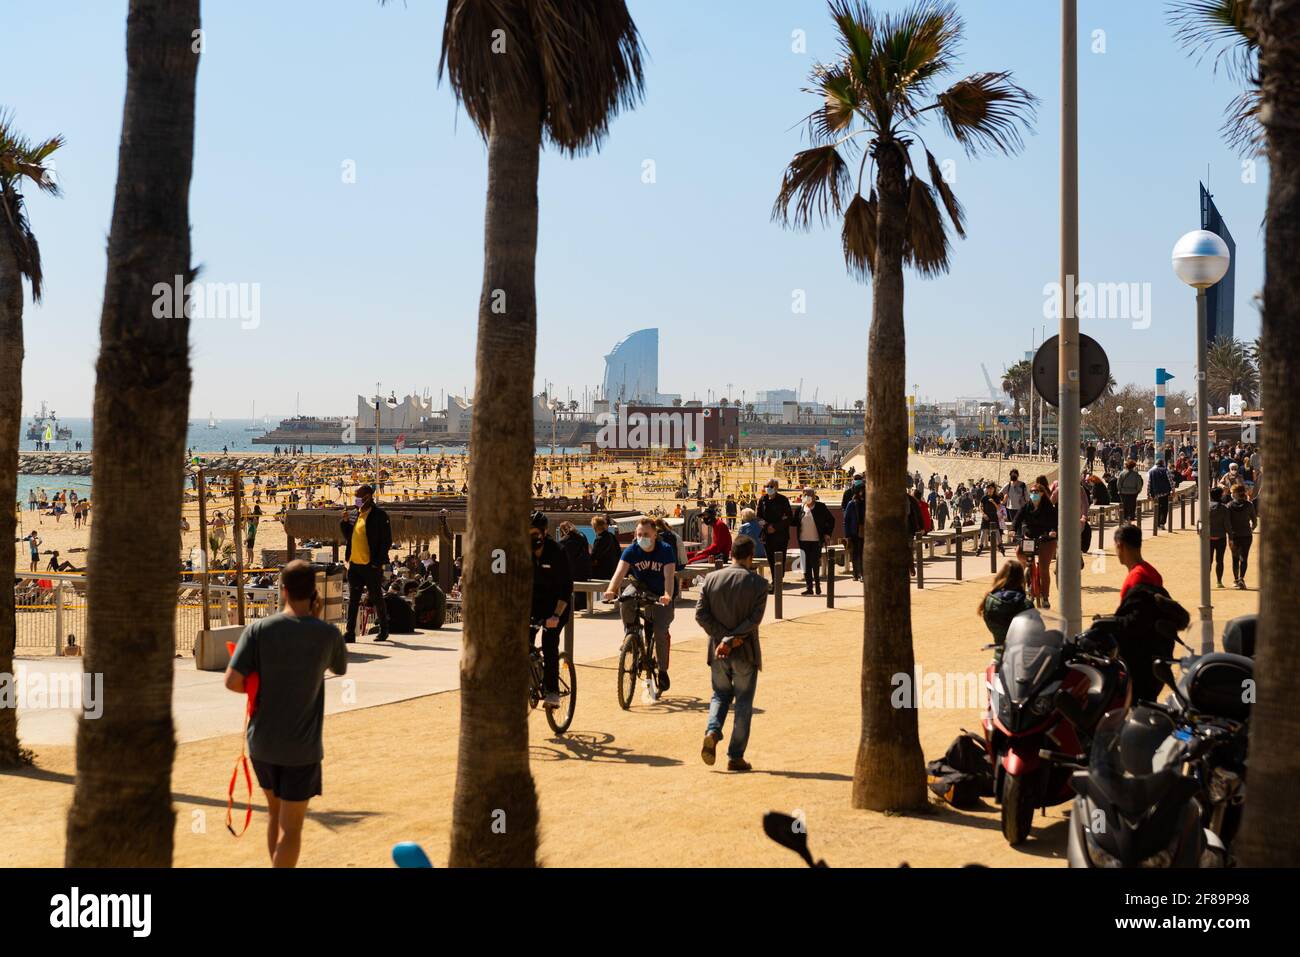 People walk and jog in a crowded Barceloneta beach with the W hotel on the background in Barcelona, Spain on March 2021. Covid19 confinement measures are becoming more relaxed in as the government tries to push the economic recovery and the tourism industry (Photo by Davide Bonaldo/Sipa USA) Stock Photo